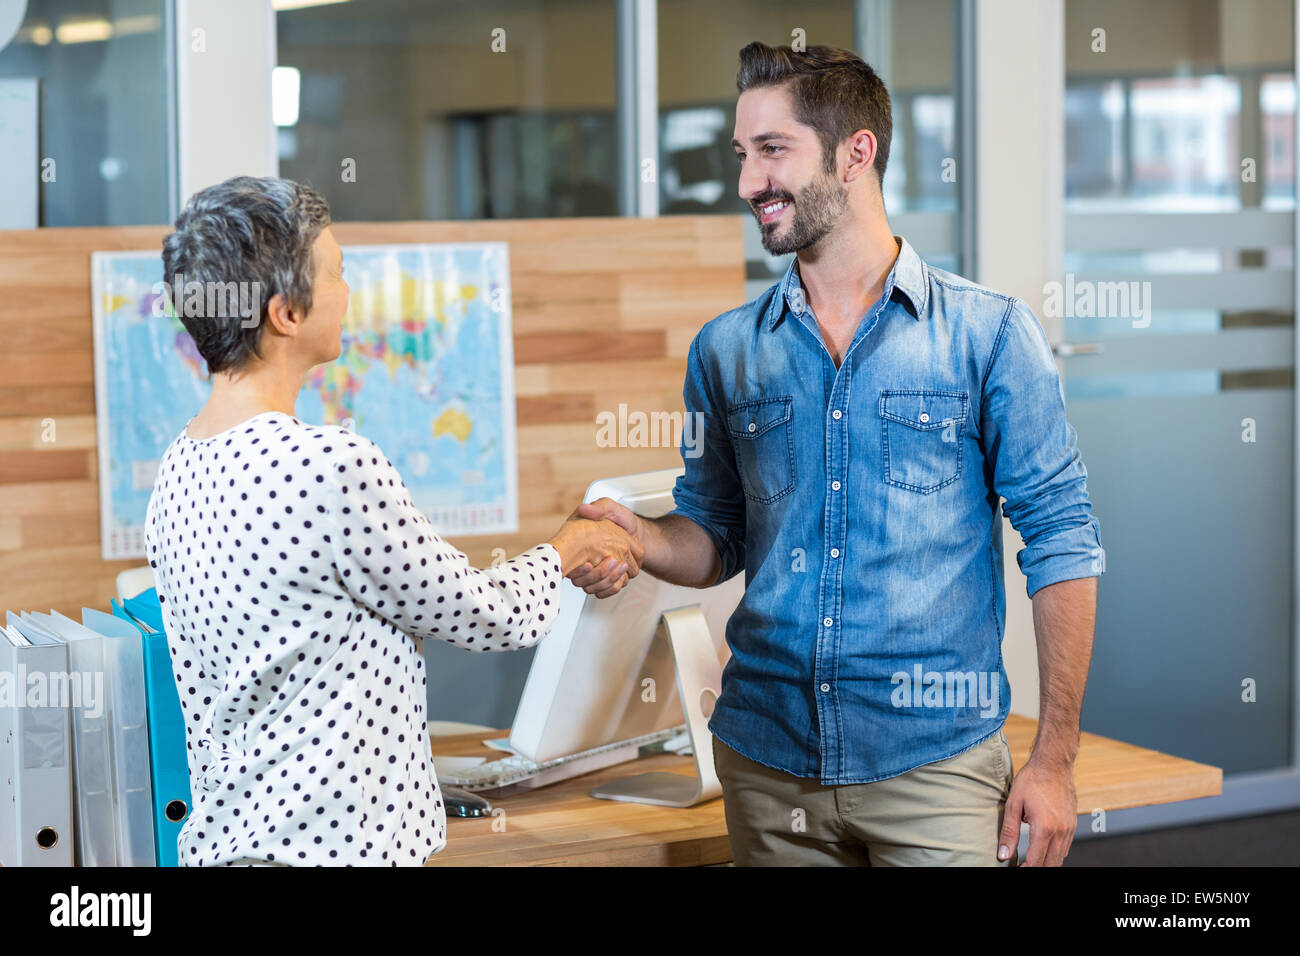 Smiling business people shaking hands Banque D'Images